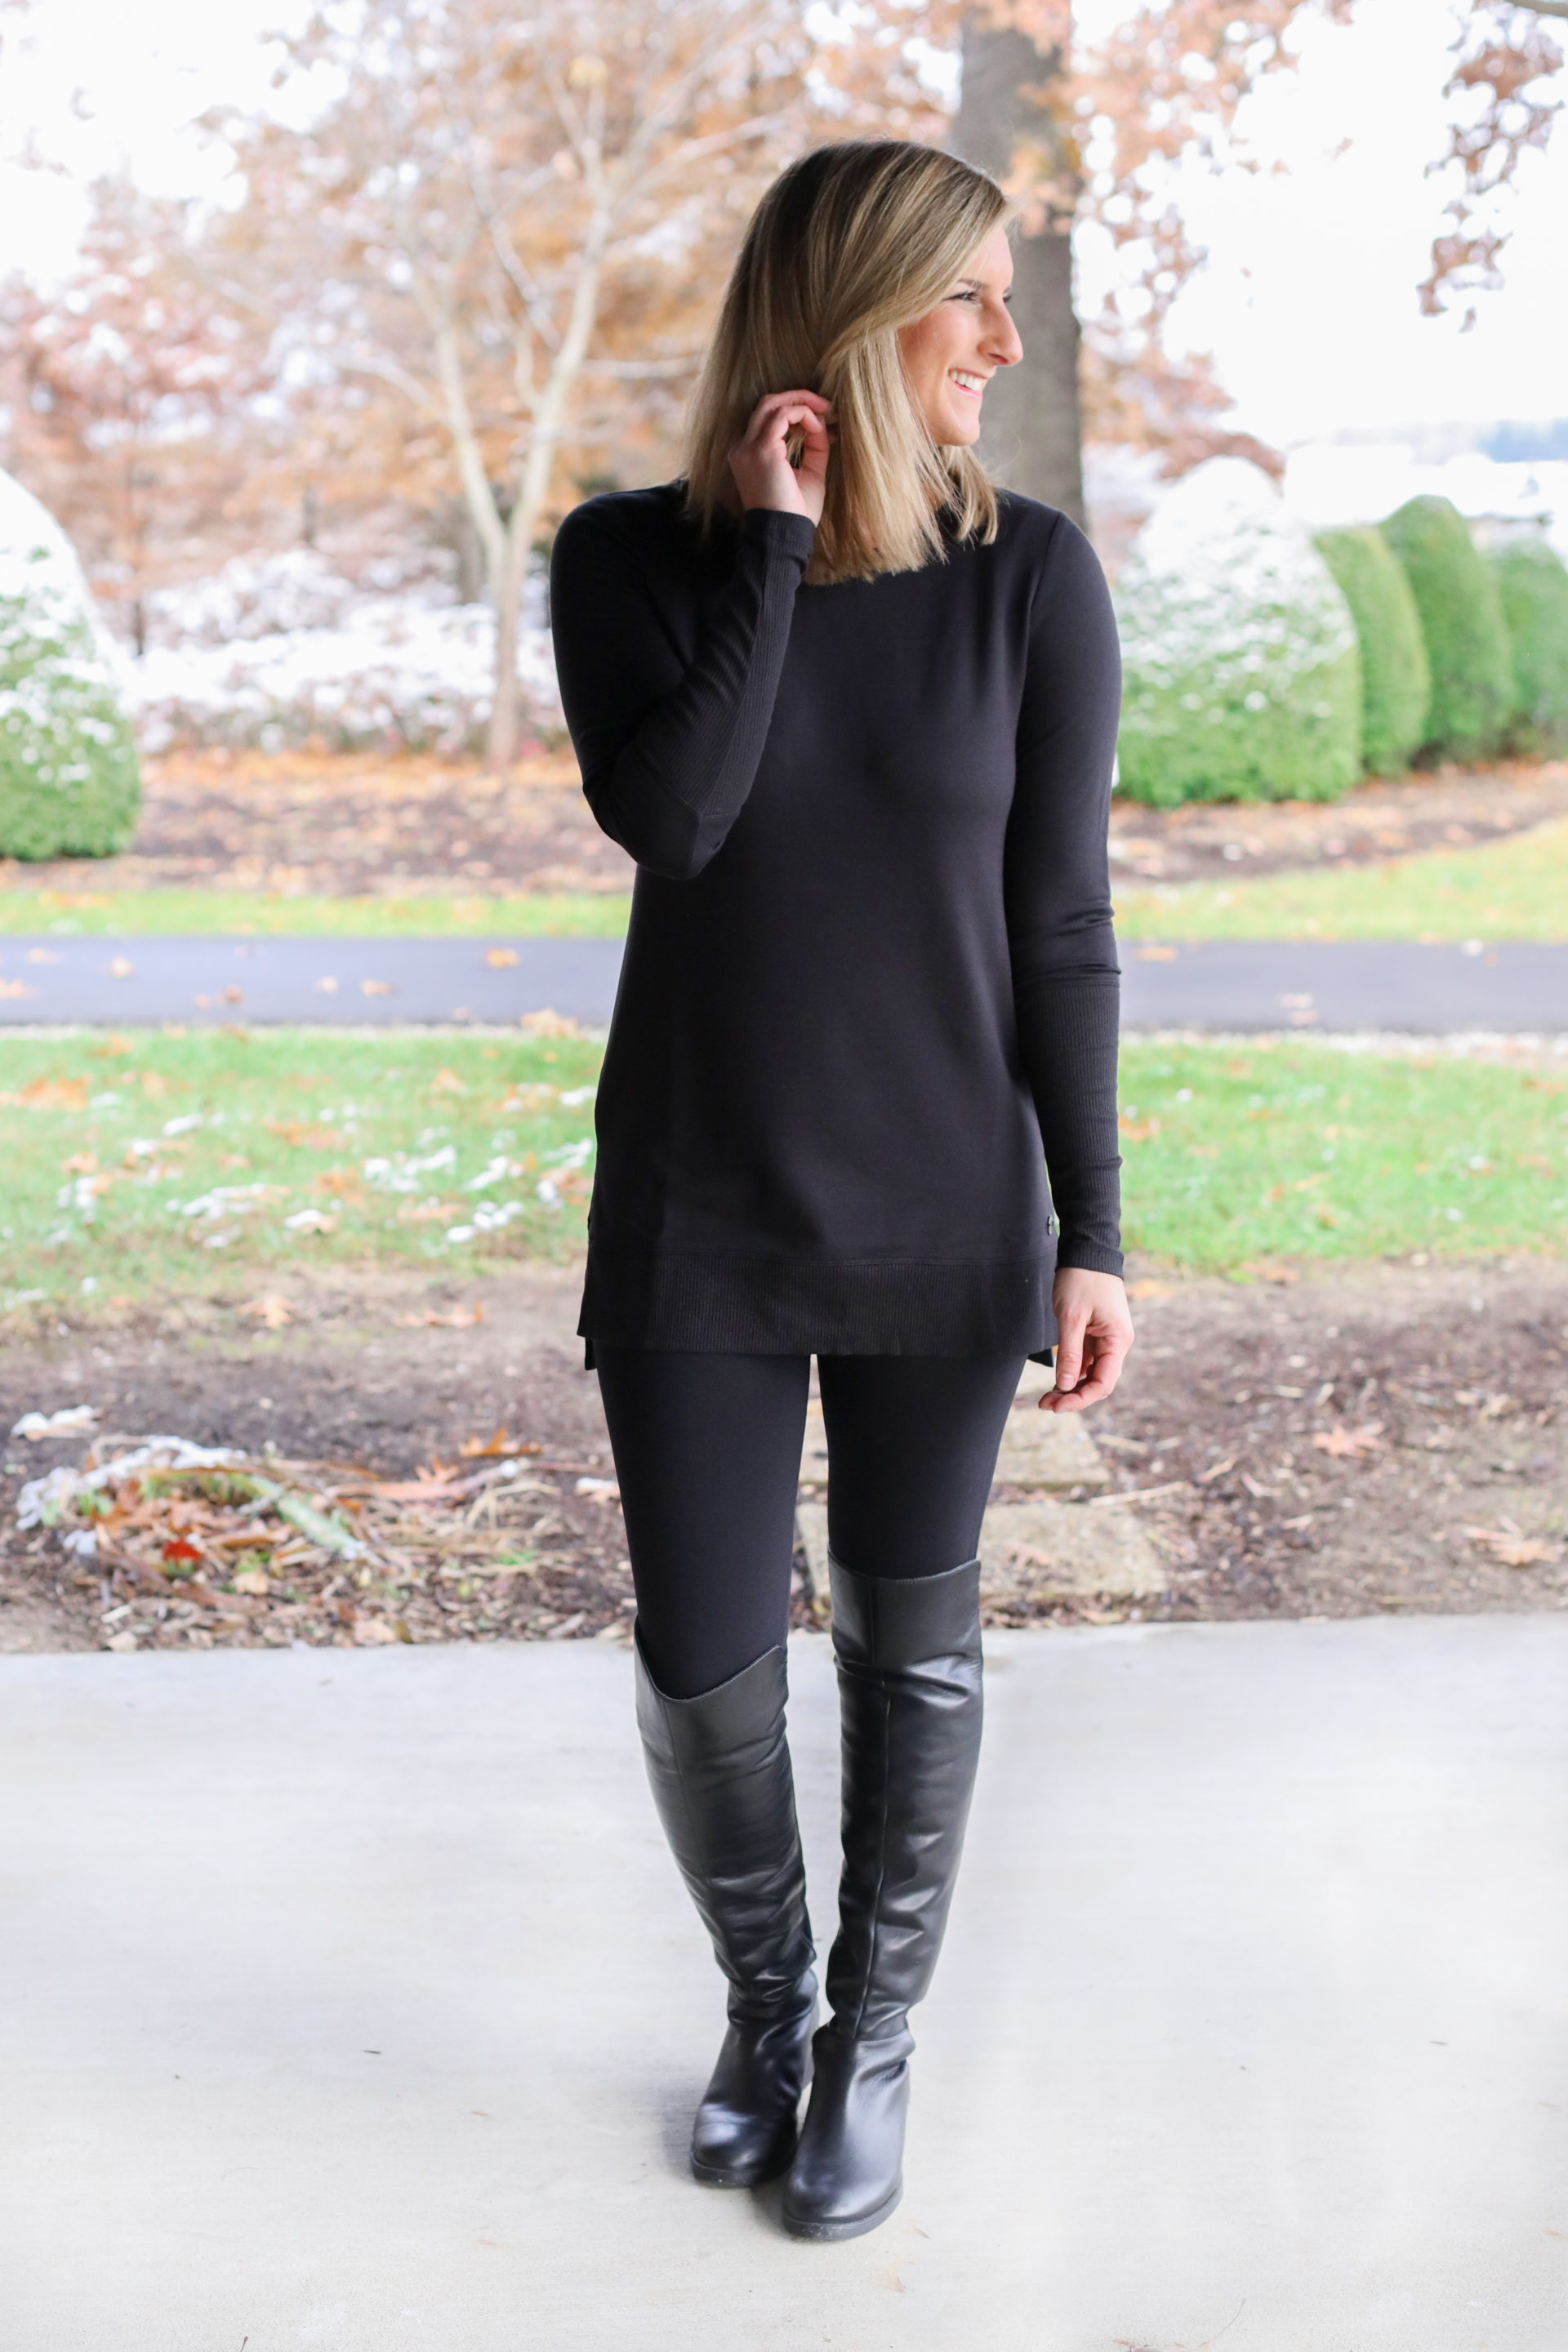 Dresses with leggings, Outfits with leggings, Tunic dress with leggings